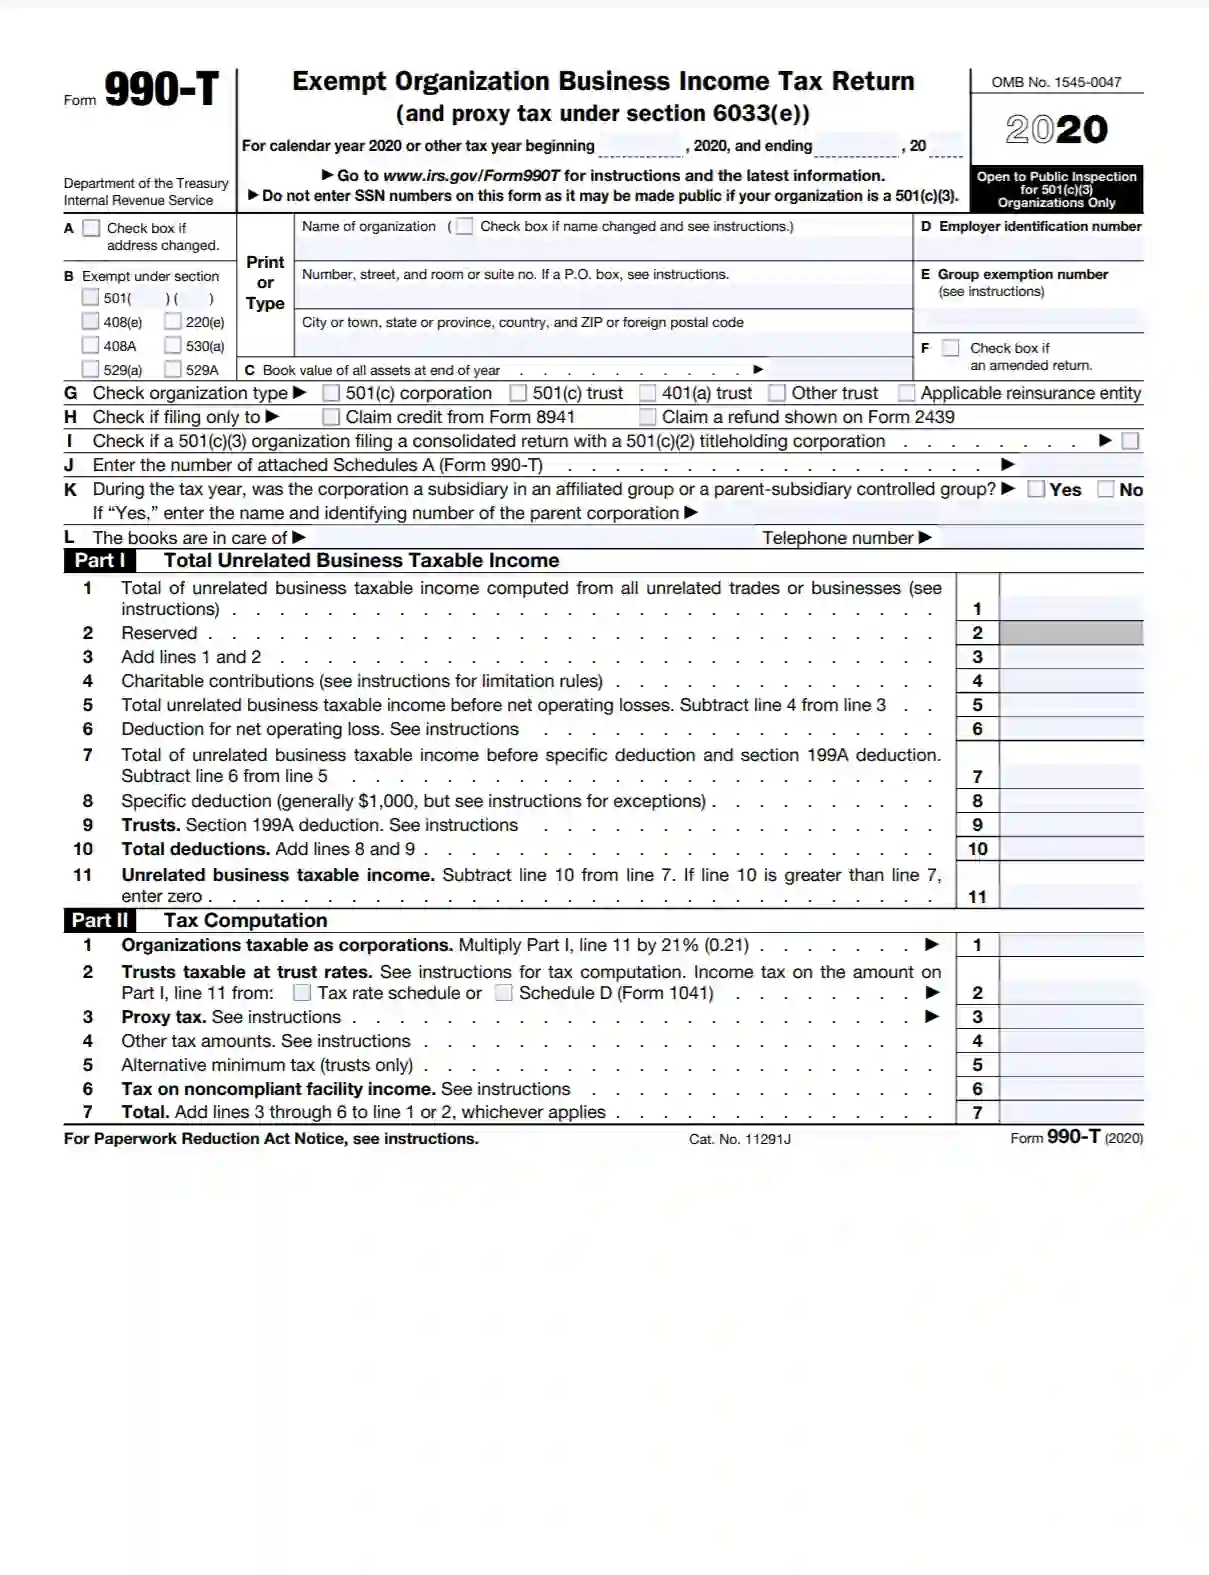 irs-form-990-t-2020